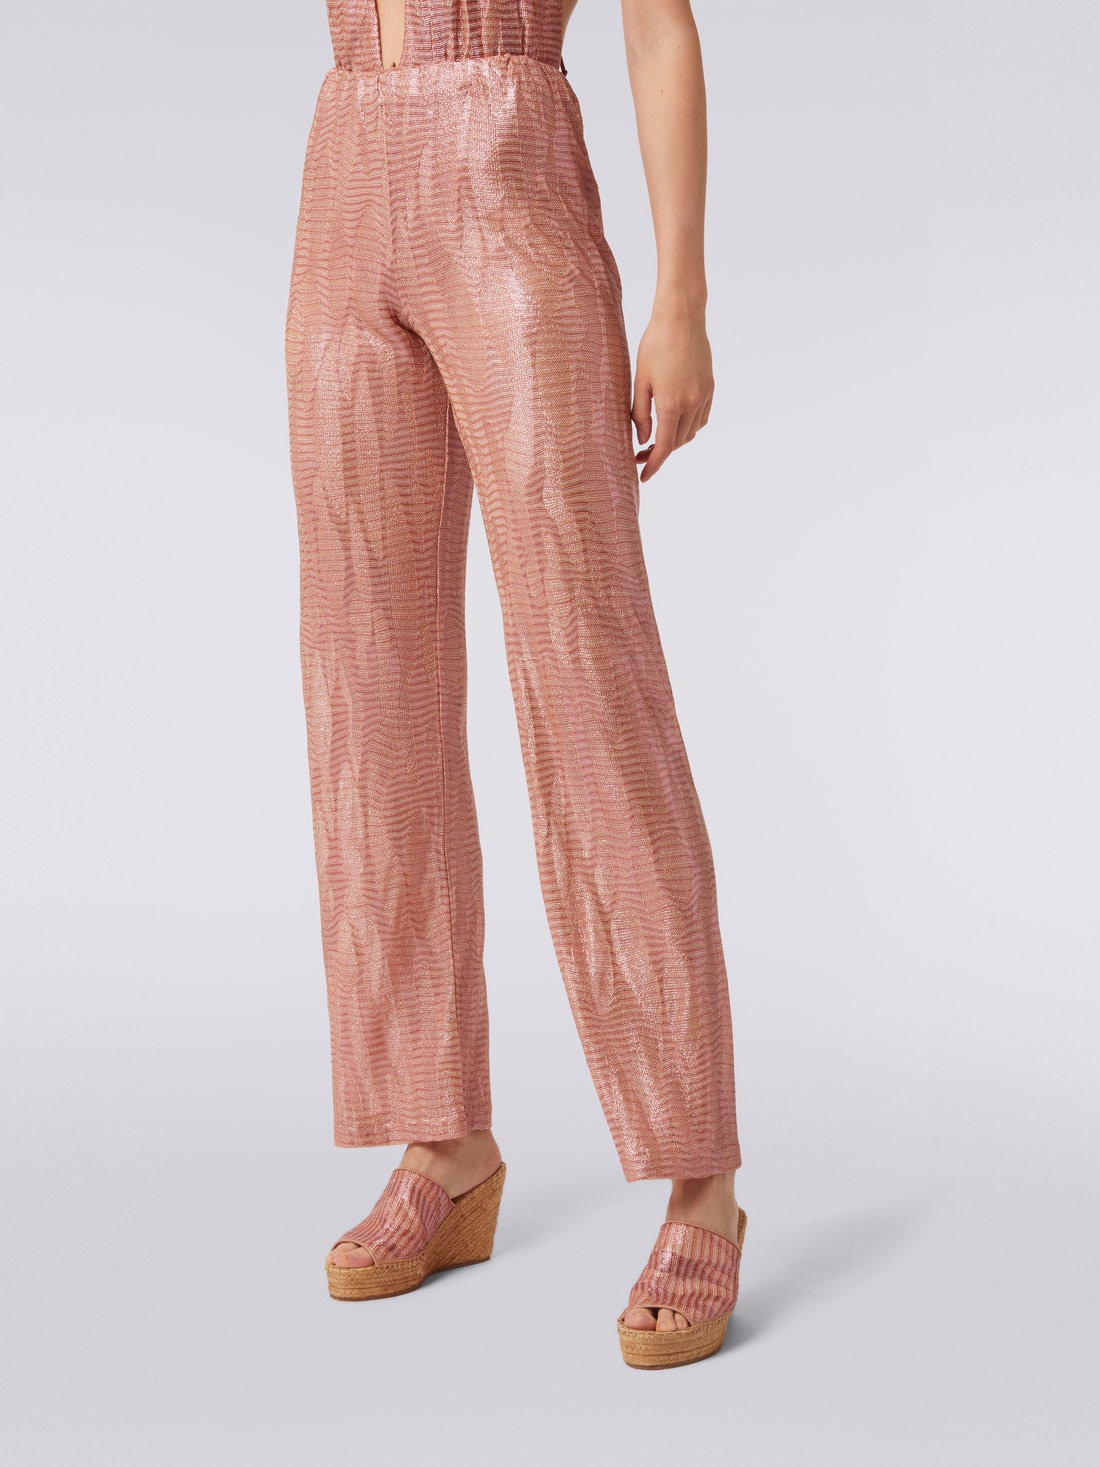 Straight trousers in jacquard viscose knit, Pink - MS22SI08BT006OS30CH - 4